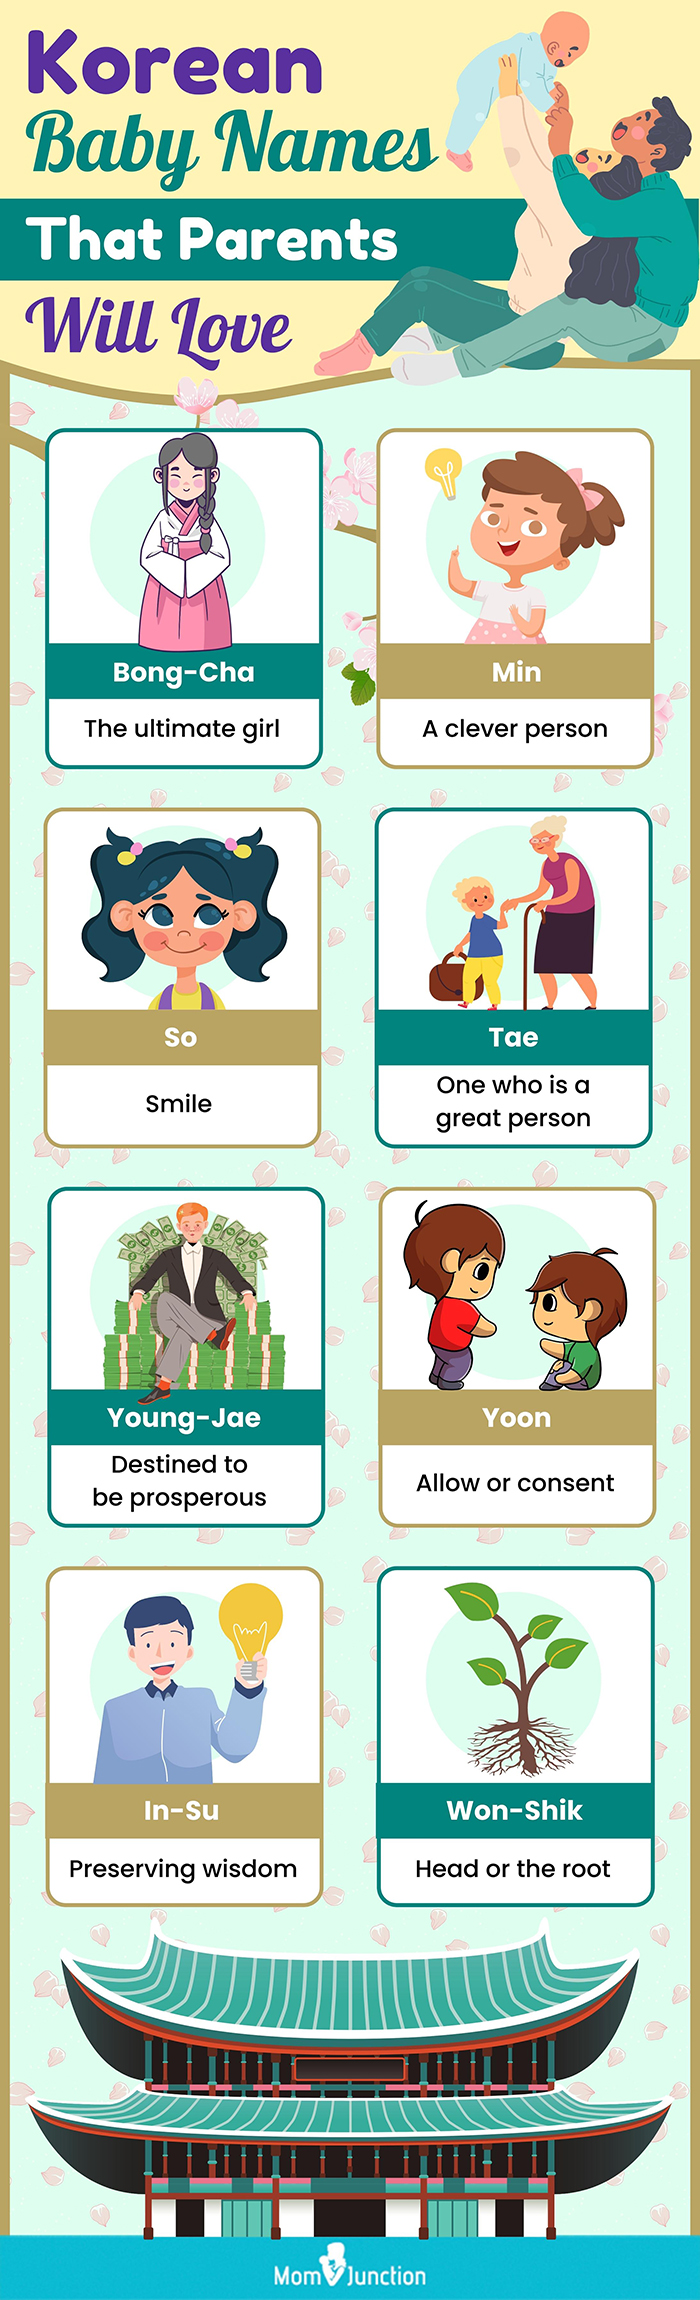 korean baby names that parents will love (infographic)